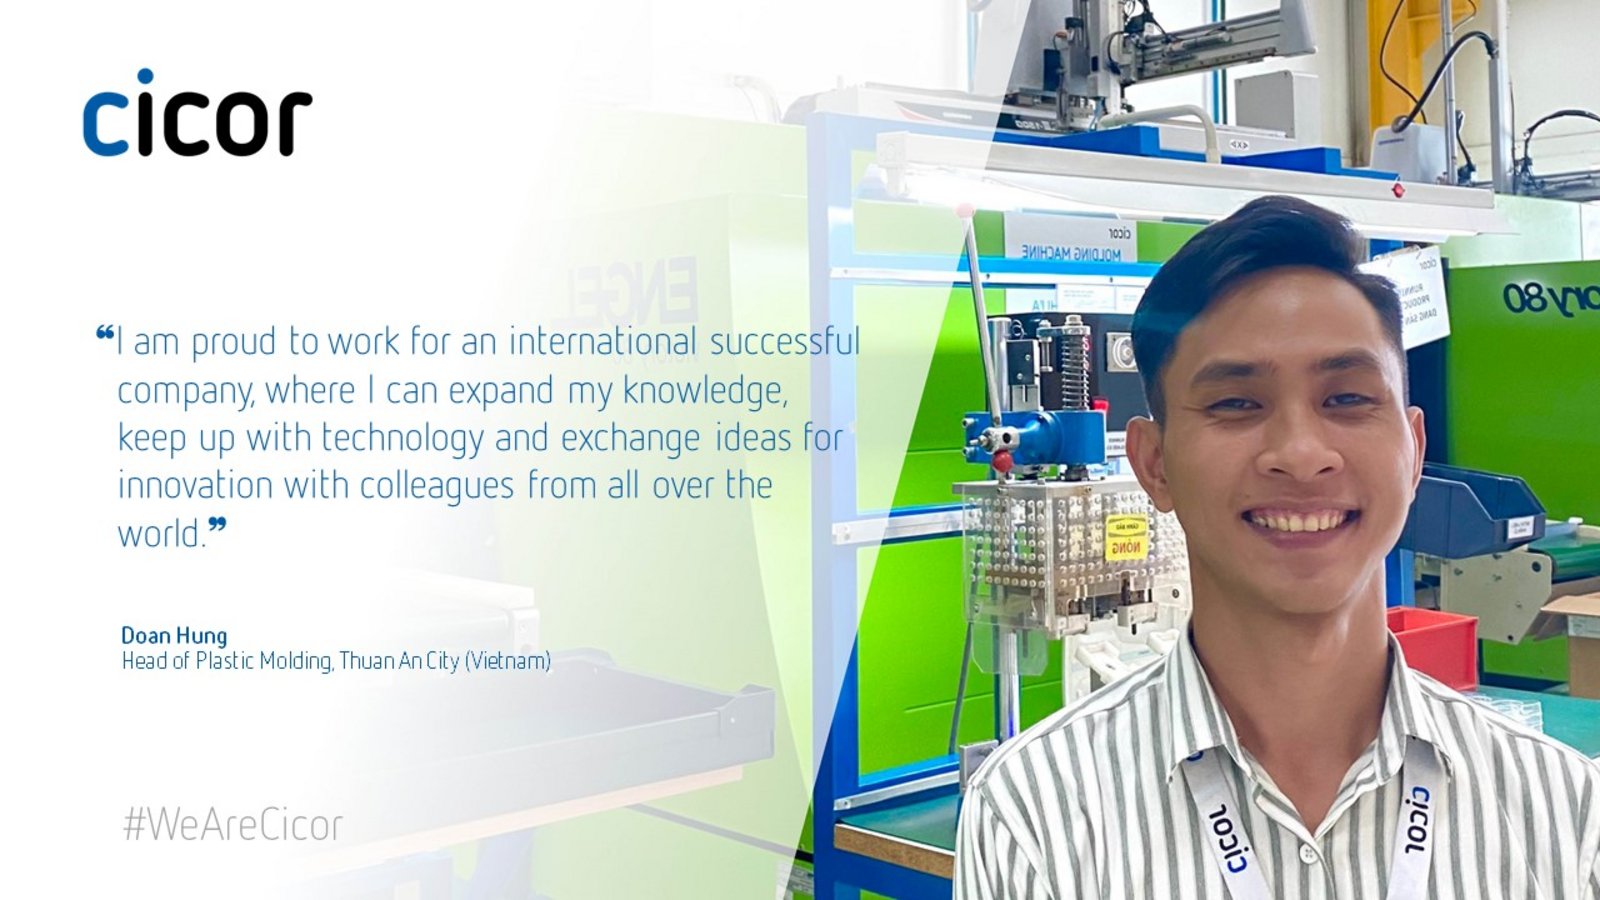 Testimonial of Doan Hung who works at the Cicor site in Thuan An City